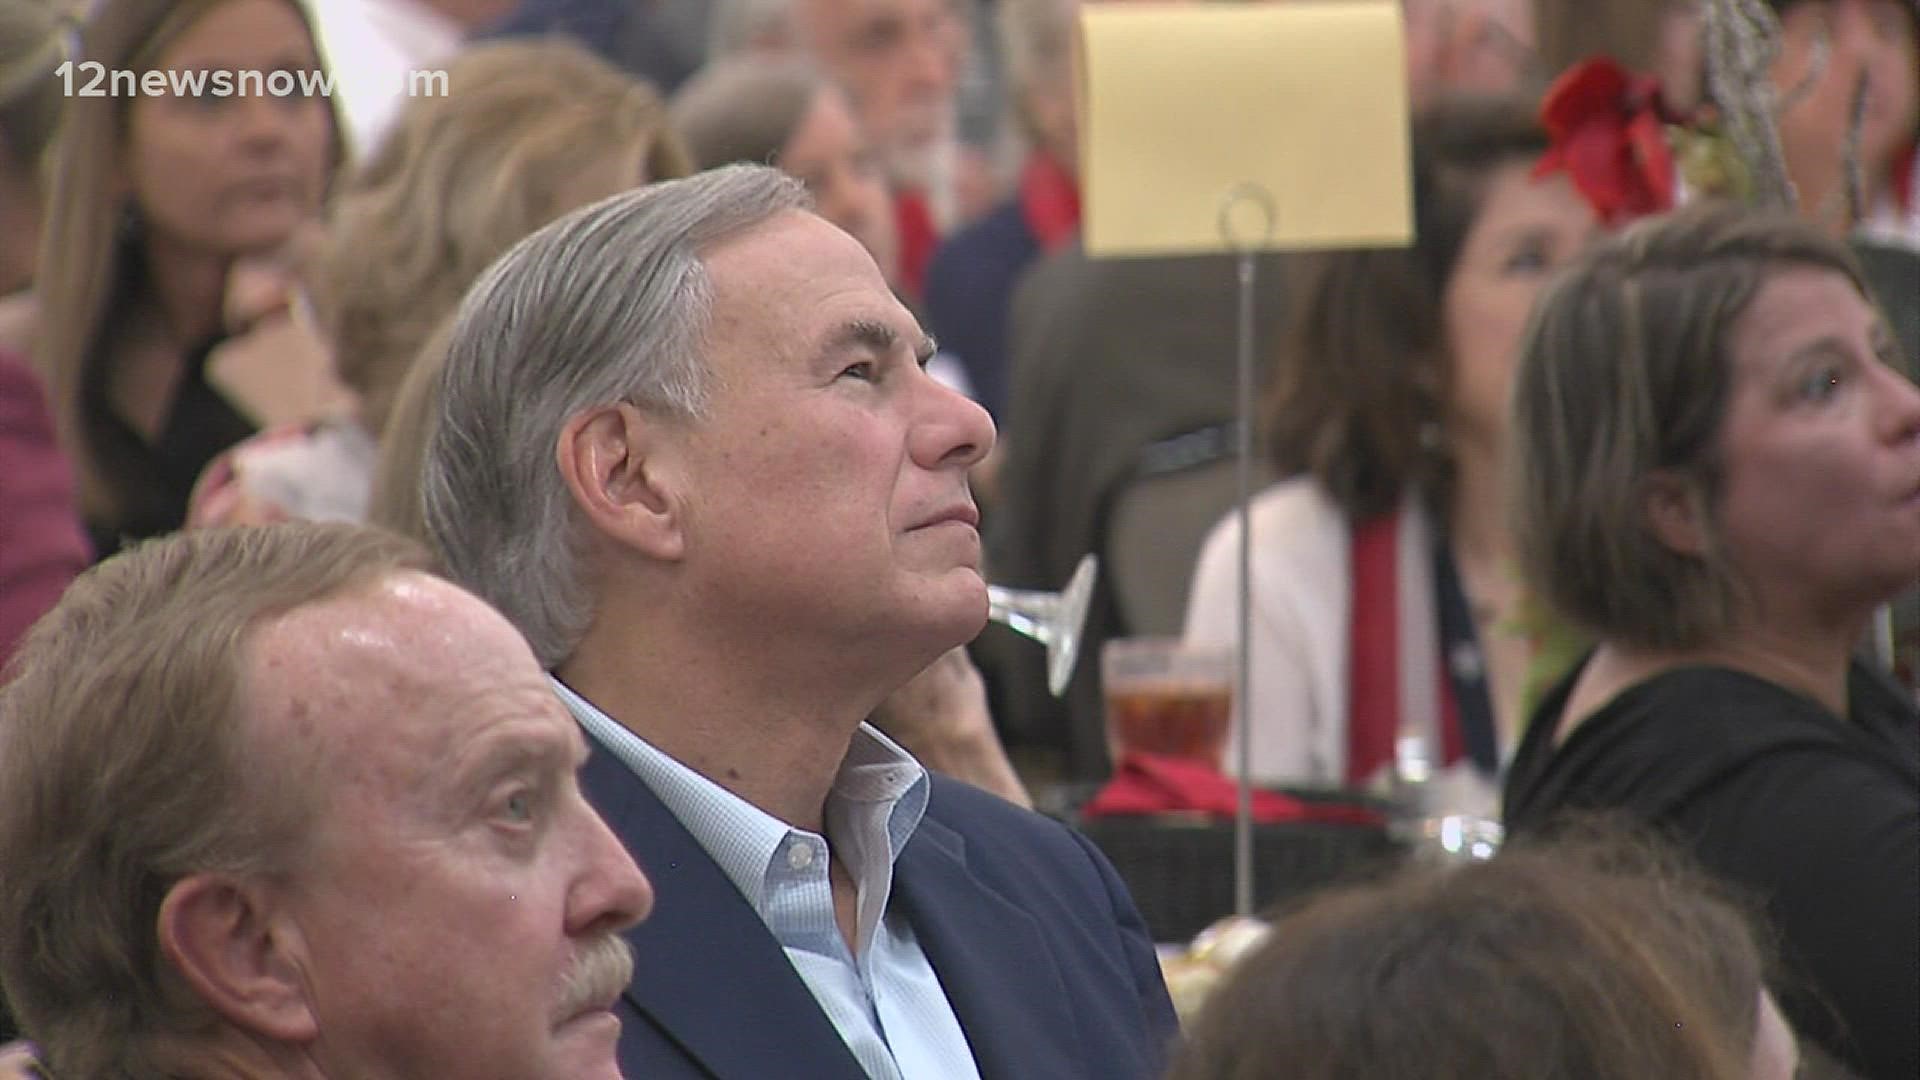 Gov. Abbott spoke with members of the Golden Triangle Republican Women at their luncheon.